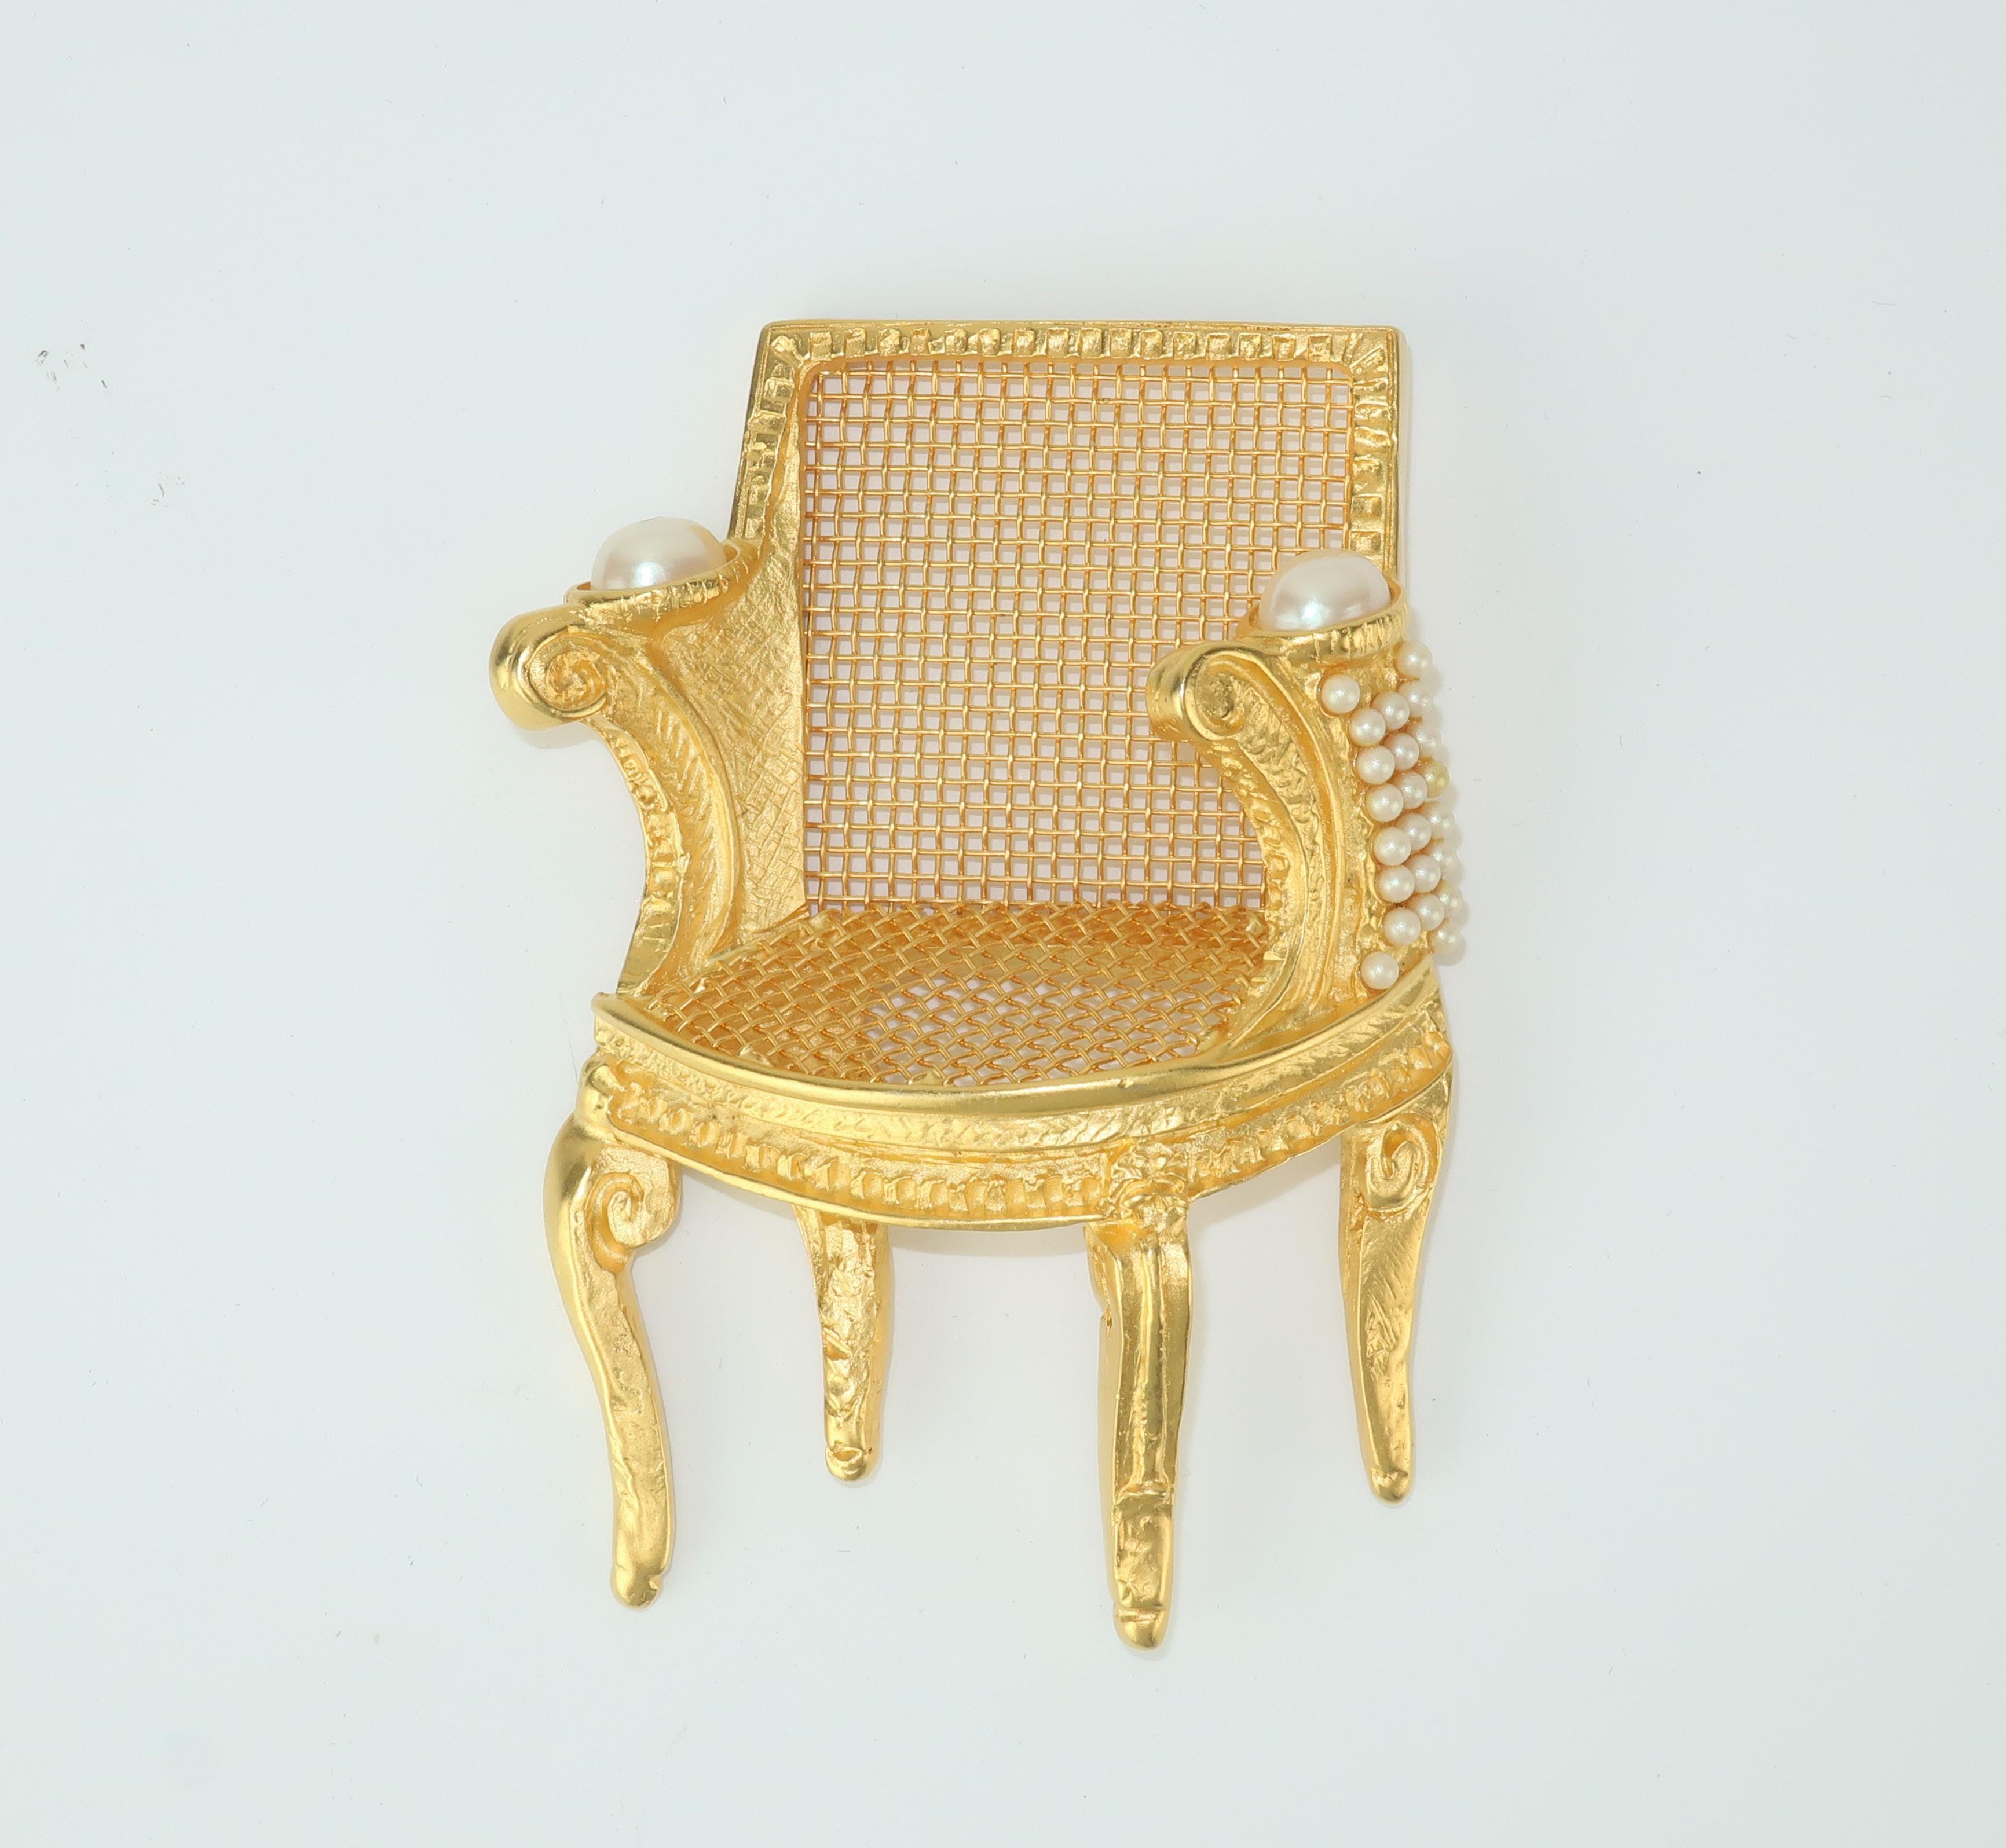 Get your seat at the table in grand style with this fun and fabulous Karl Lagerfeld chair brooch.  The 3-D French bergère style chair is highly detailed in a matte gilt gold metal accented with faux pearls.  The clever open screen back and seat